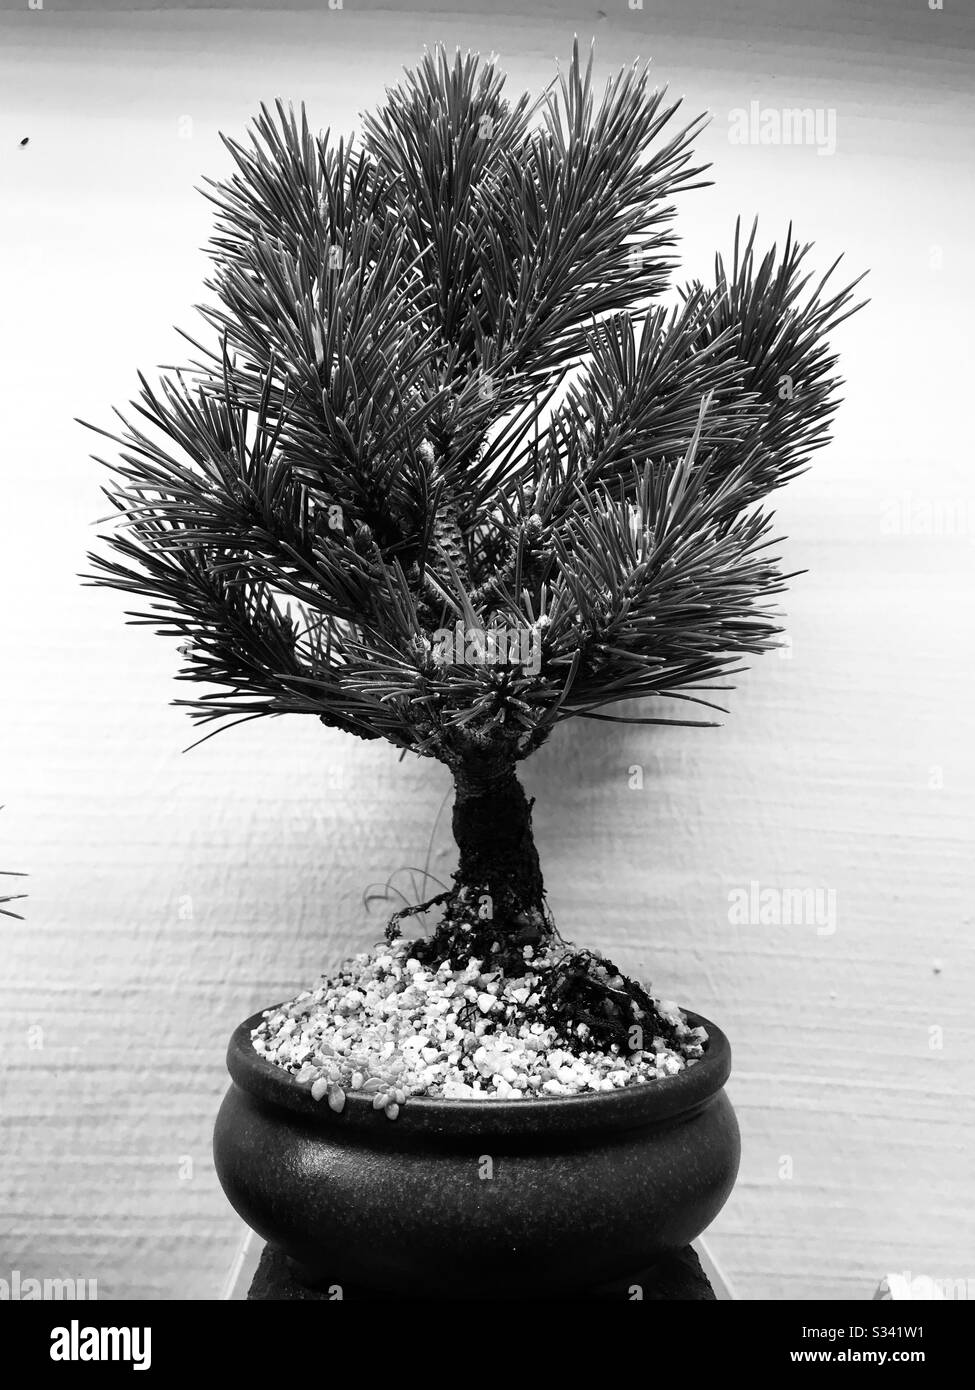 Pinus pentaphylla bonsai on a table kept outdoor- black & white image- close up pic of pine tree Stock Photo